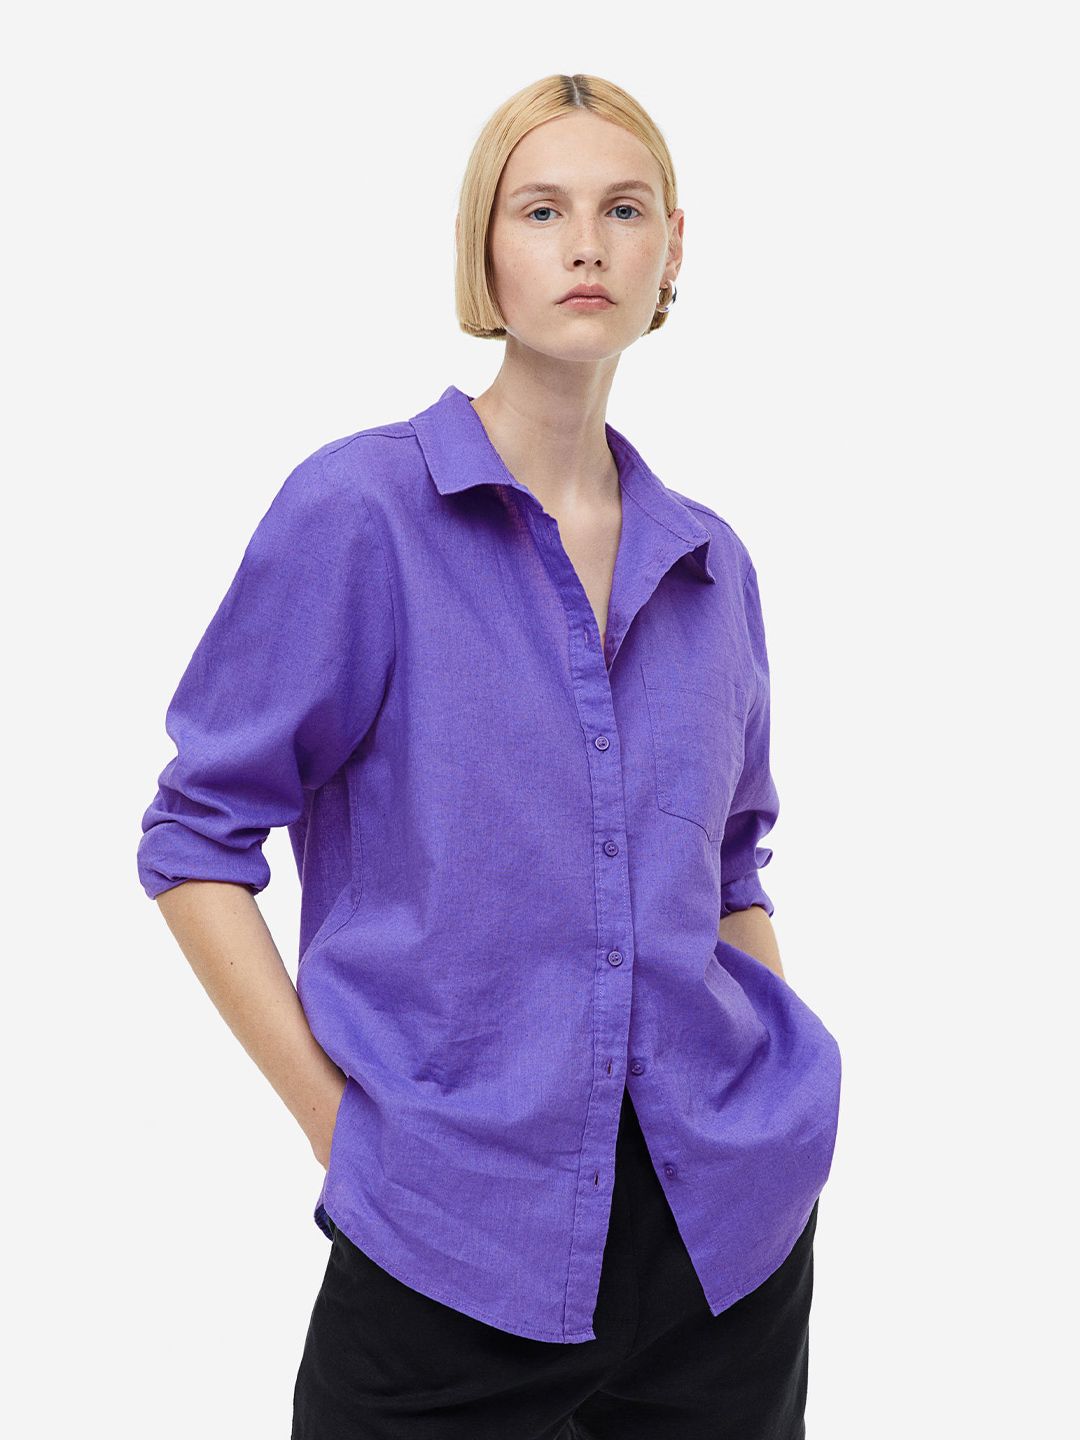 H&M Linen-Blend Shirt Price in India